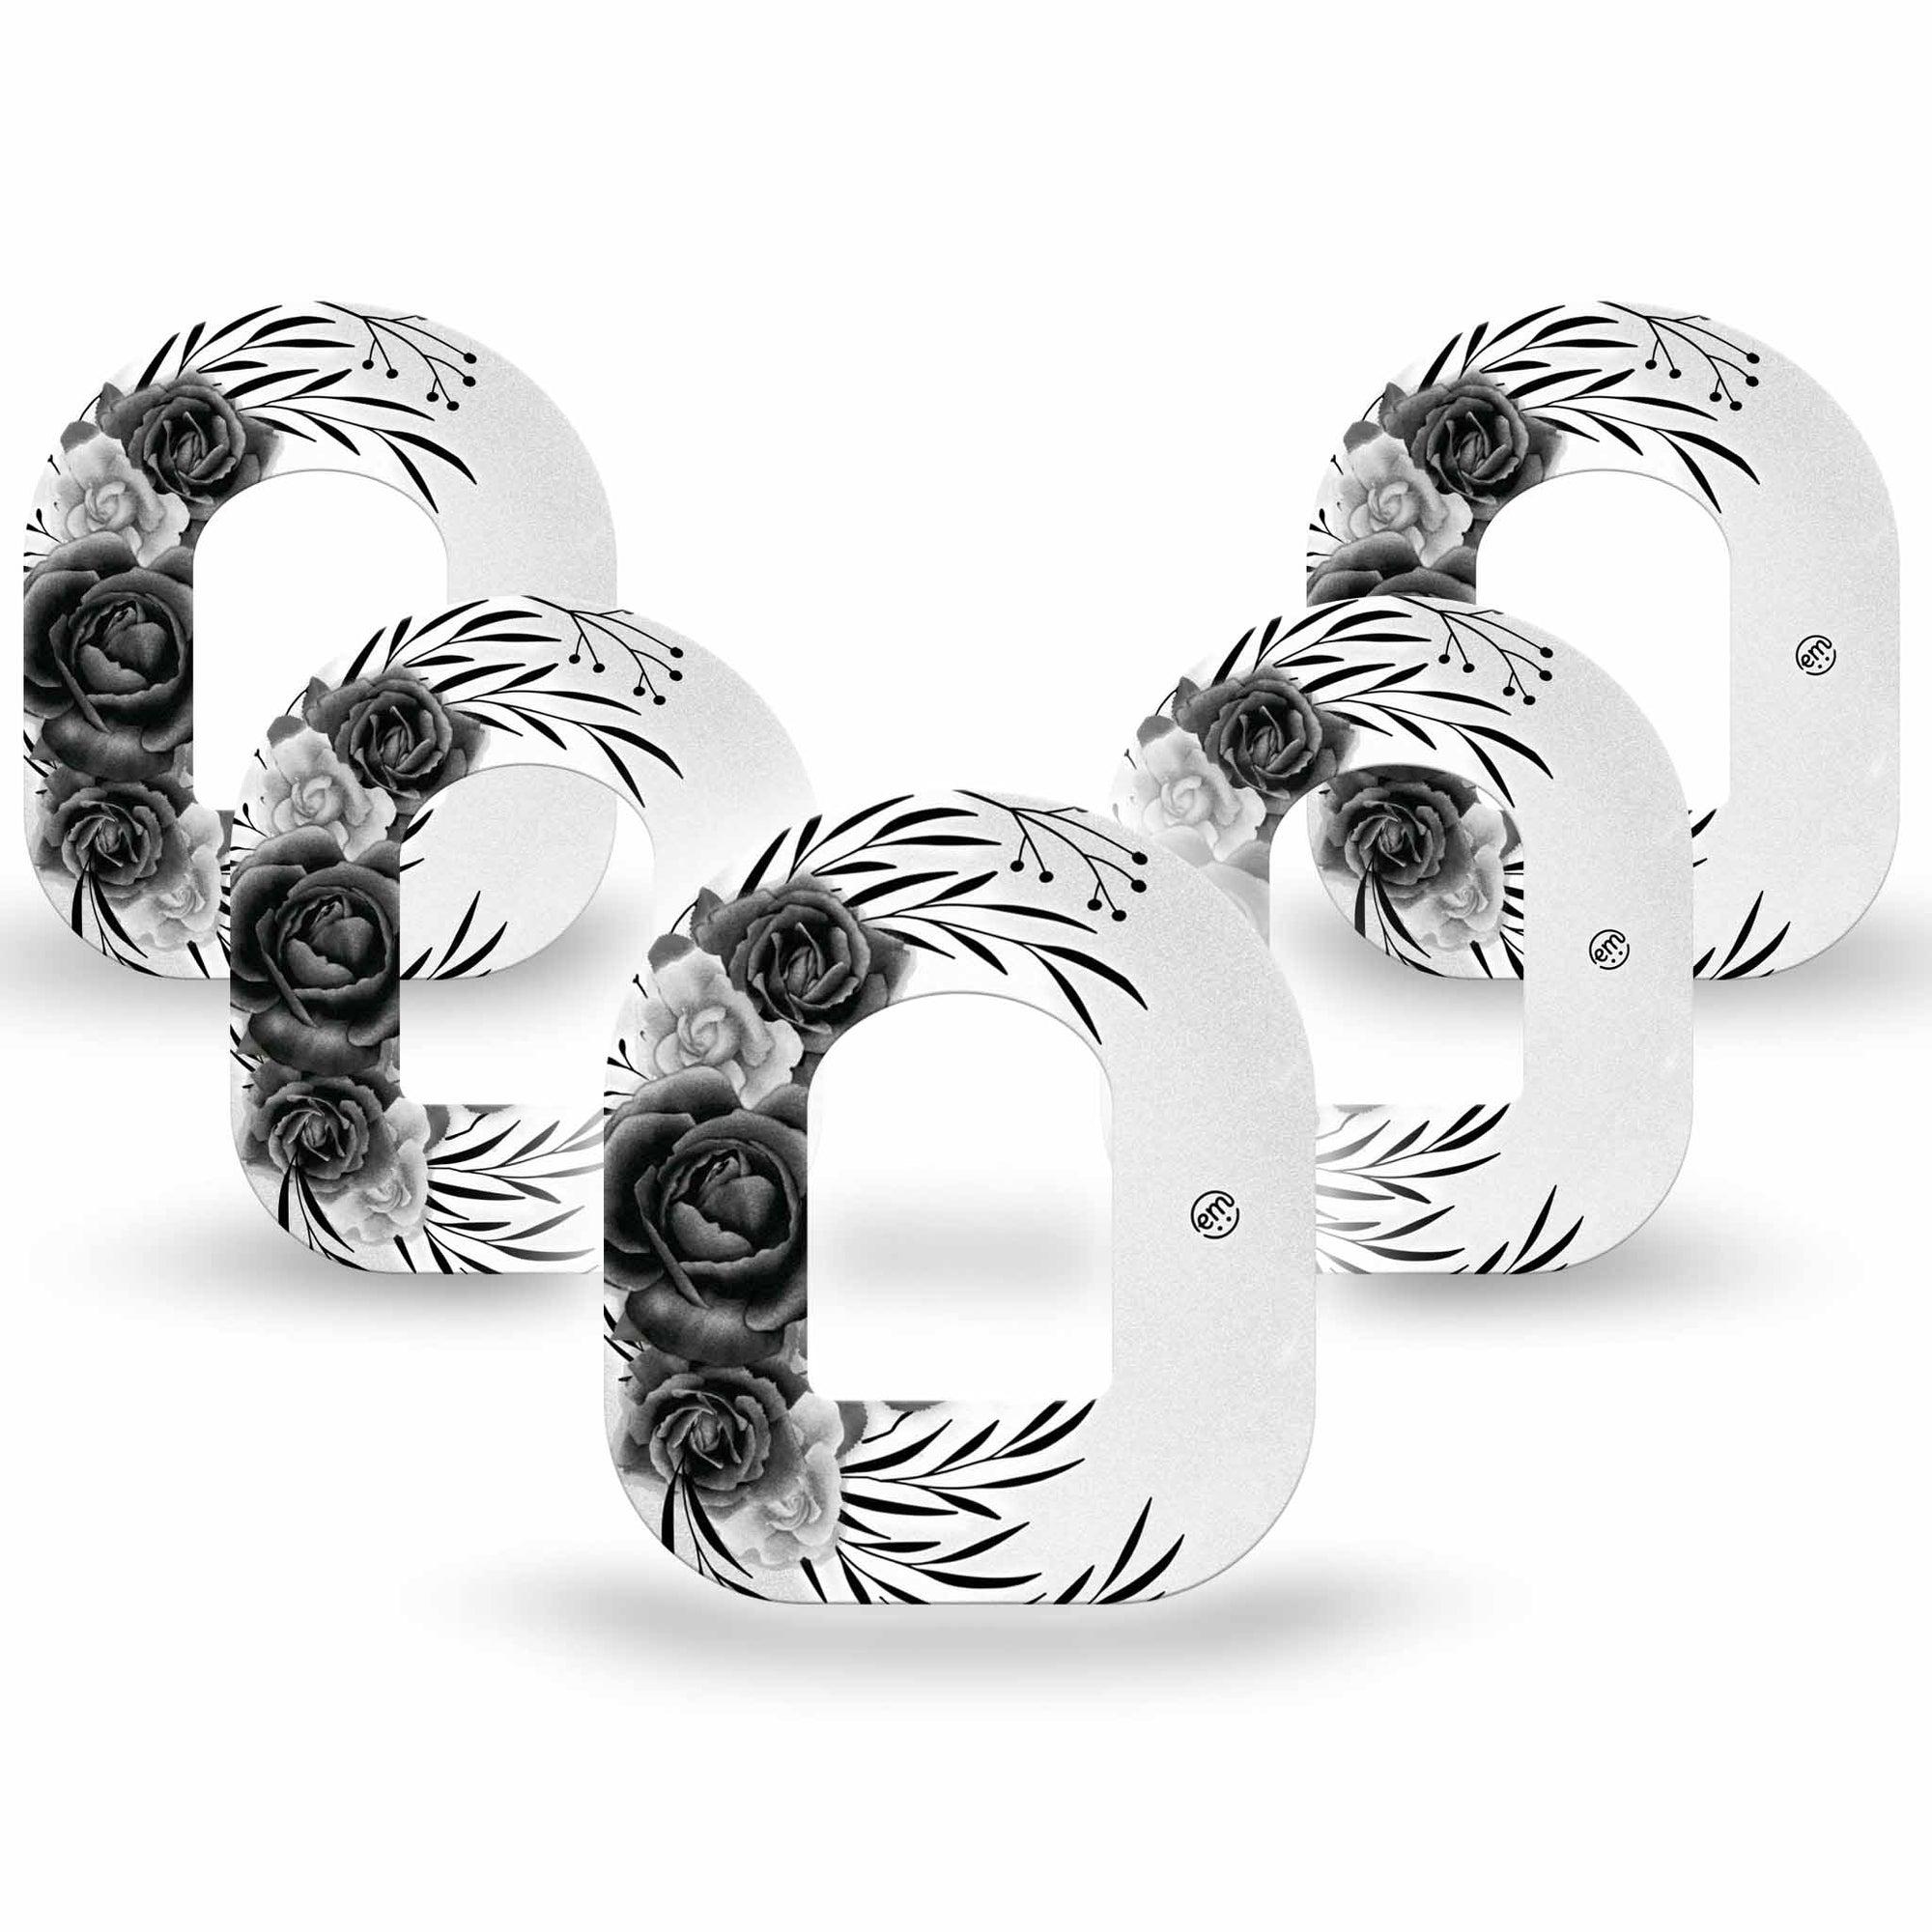 ExpressionMed Tattoo Rose Pod Tape, 5-Pack, Classic Black and White Tattoo Roses Inspired Design Pod Overlay Patch